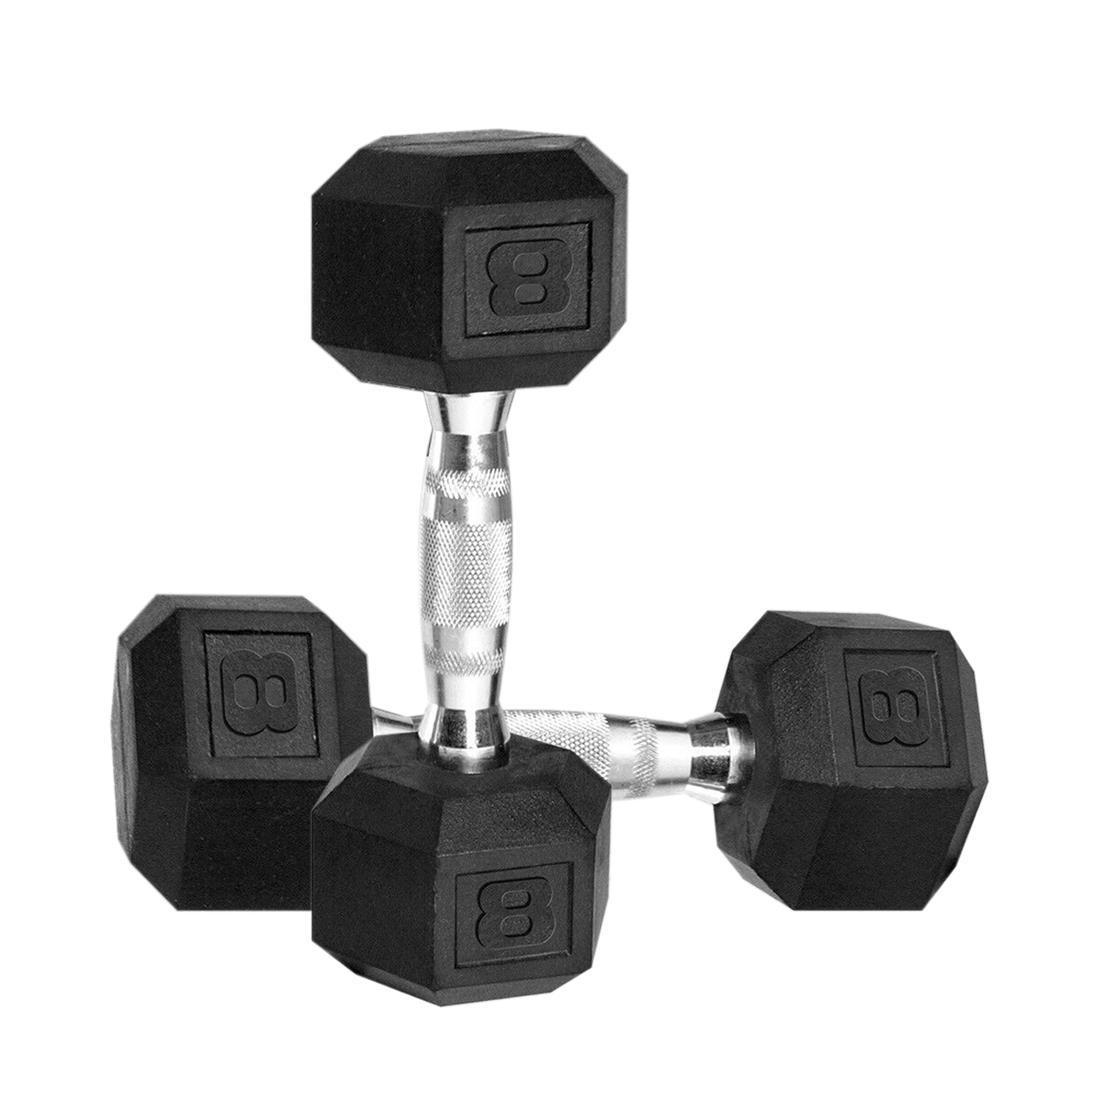 8lbs X 2 Hex Rubber Coat Iron Dumbell Strength Weight Training Commercial Grade